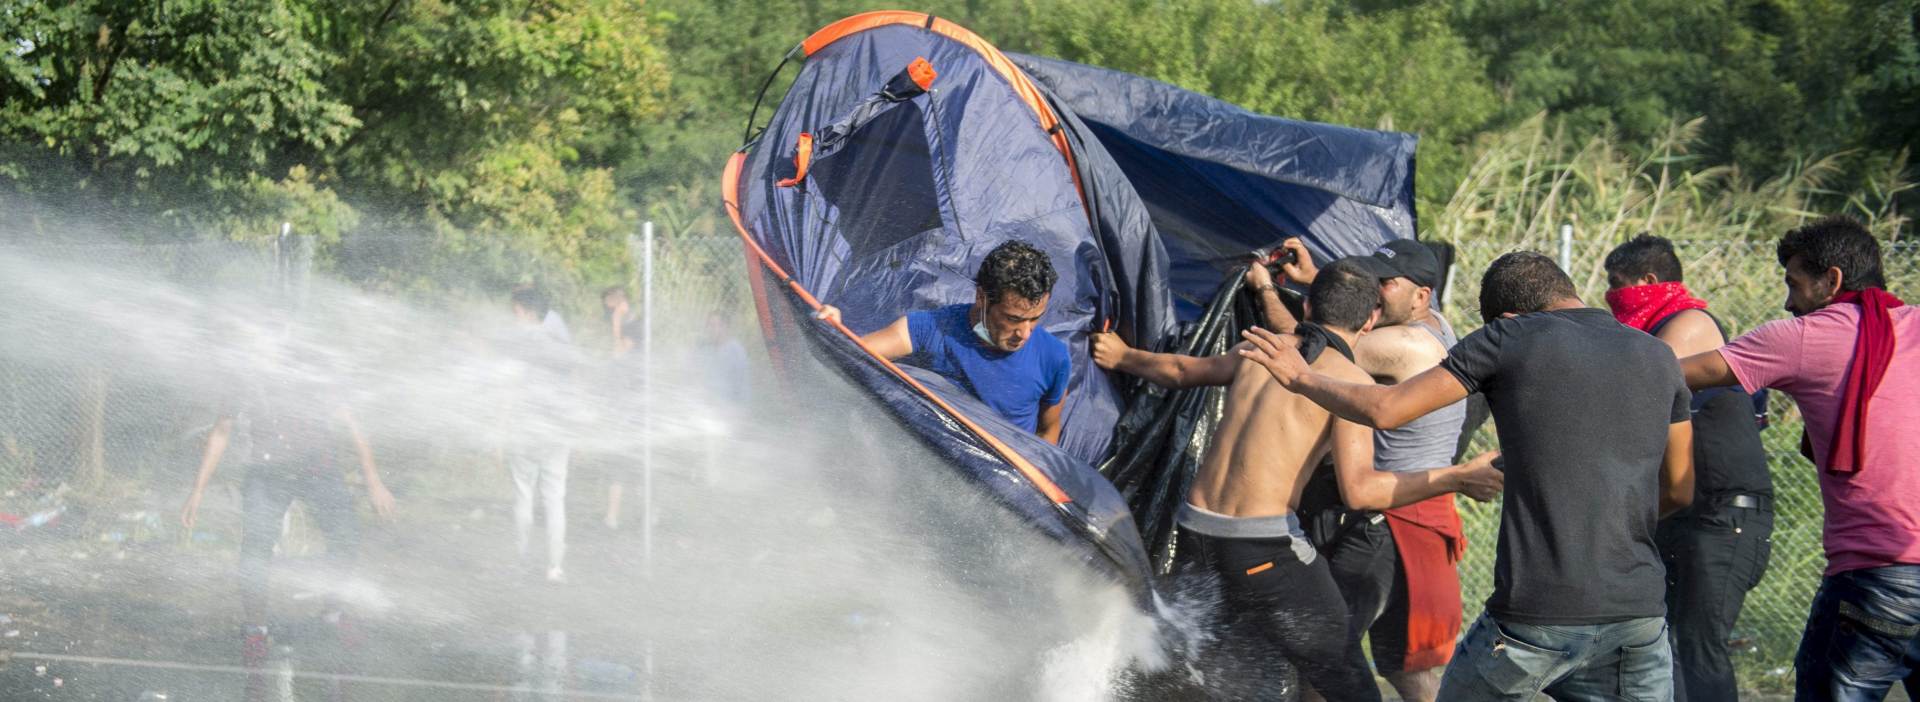 epa04933528 Hungarian police use water canons against demonstratring migrants at the border crossing into Hungary, near Horgos, Serbia, 16 September 2015. The border crossing was closed by the Hungarian police after the Hungarian government declared a state of crisis due to mass migration, meaning special measures to fight illegal immigration, in two Hungarian countries bordering Serbia.  EPA/TAMAS SOKI HUNGARY OUT